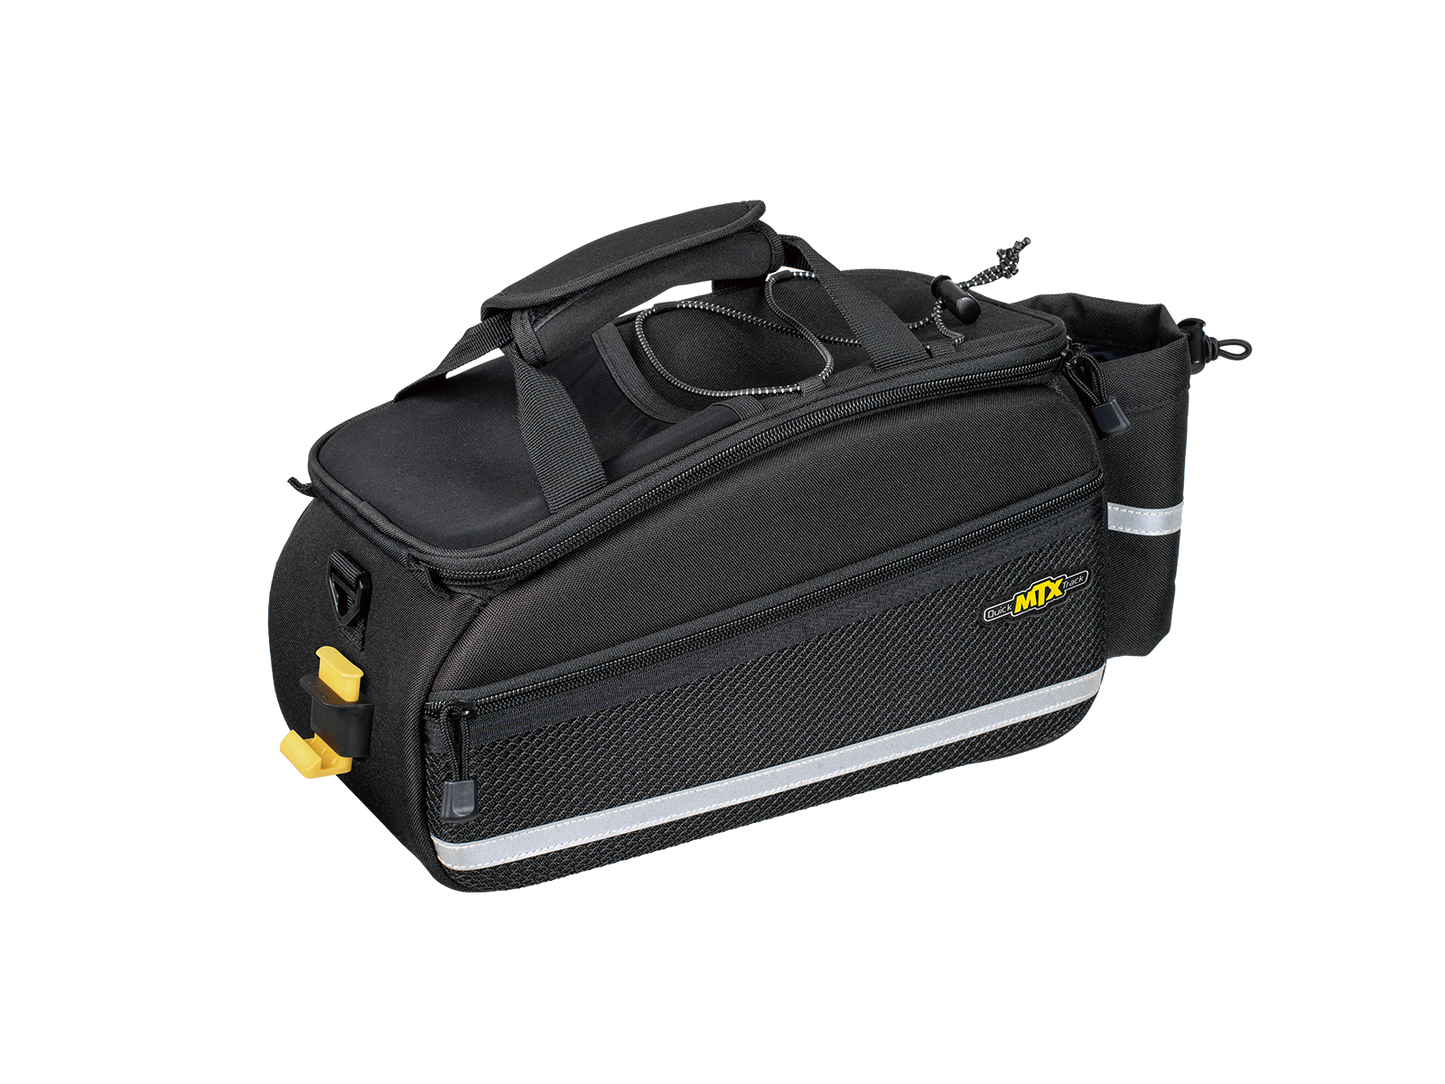 A black and gray ToPeak Bag - Topeak MTX EX made from durable 600 denier polyester features multiple compartments, reflective strips, and a yellow logo reading "MTX." Utilizing MTX QuickTrack for easy attachment, the Bag - Topeak MTX EX has a handle on top and zippers for convenience.